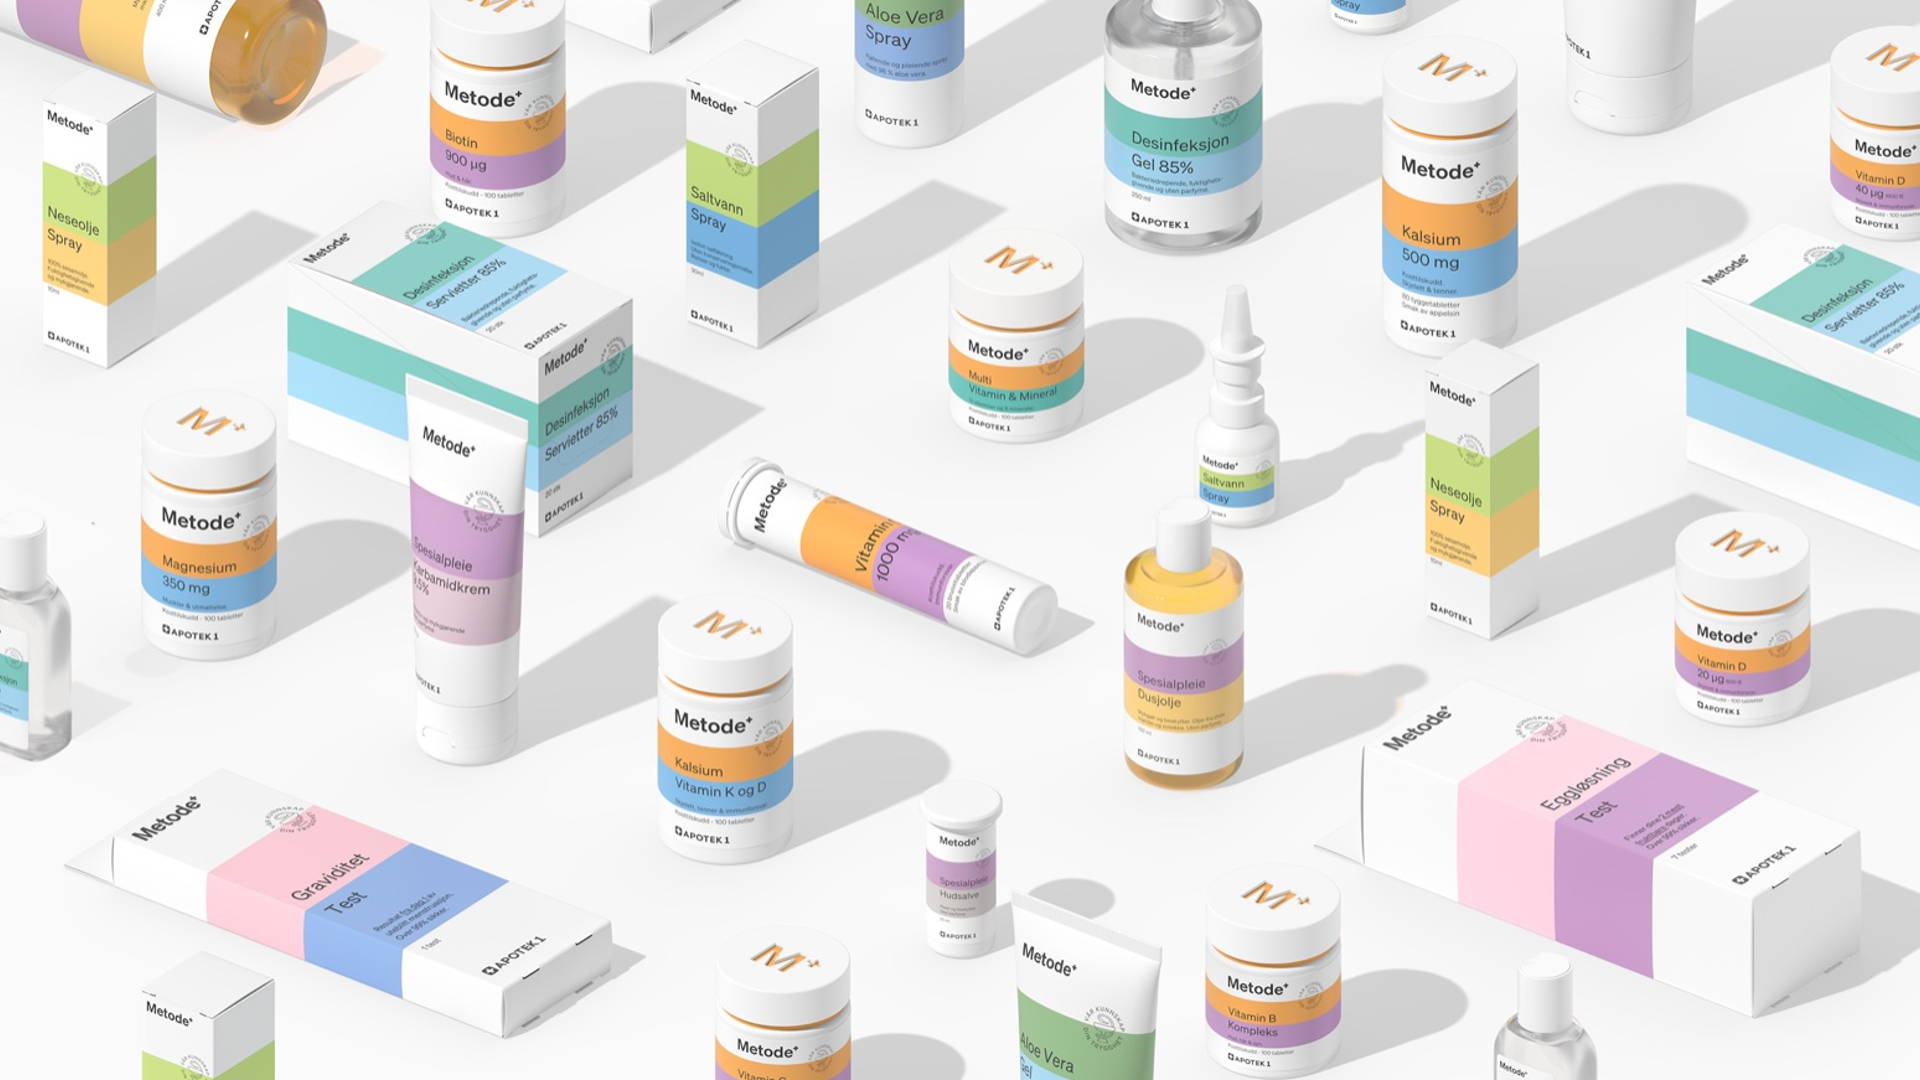 Featured image for Creative Agency Goods Taps Into The Modernist Style Of 60s Pharma For Apotek1’s Metode Housebrand